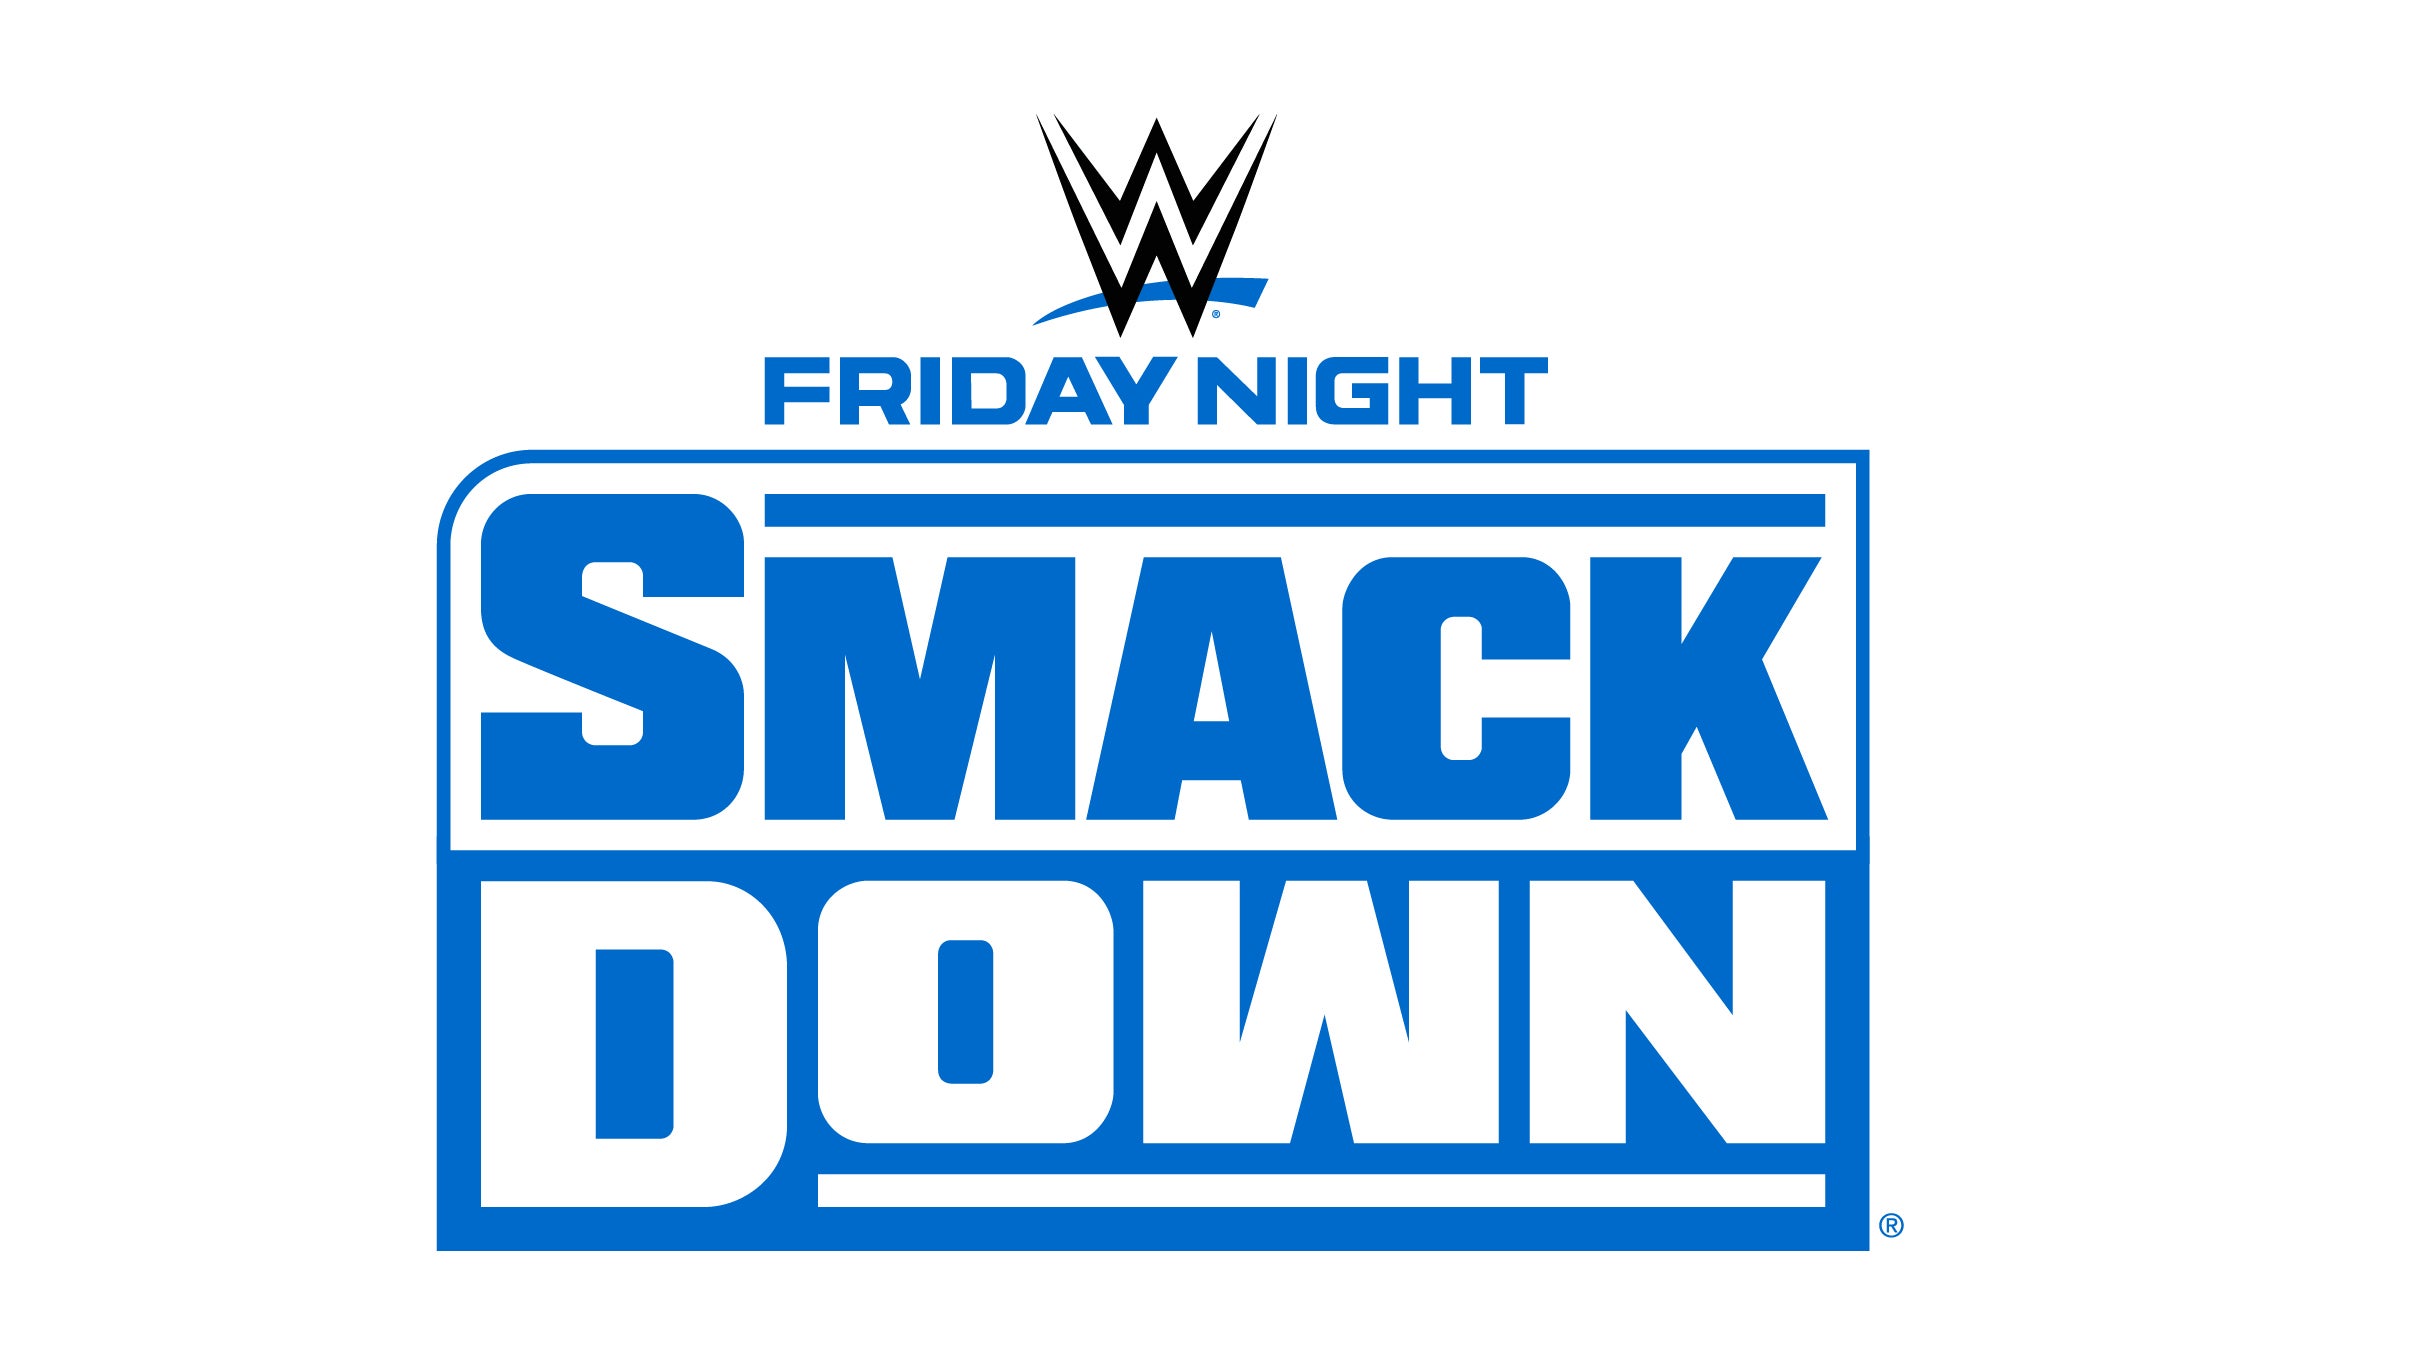 WWE FRIDAY NIGHT SMACKDOWN + CLASH AT THE CASTLE - COMBO TICKET in Glasgow promo photo for WWE presale offer code